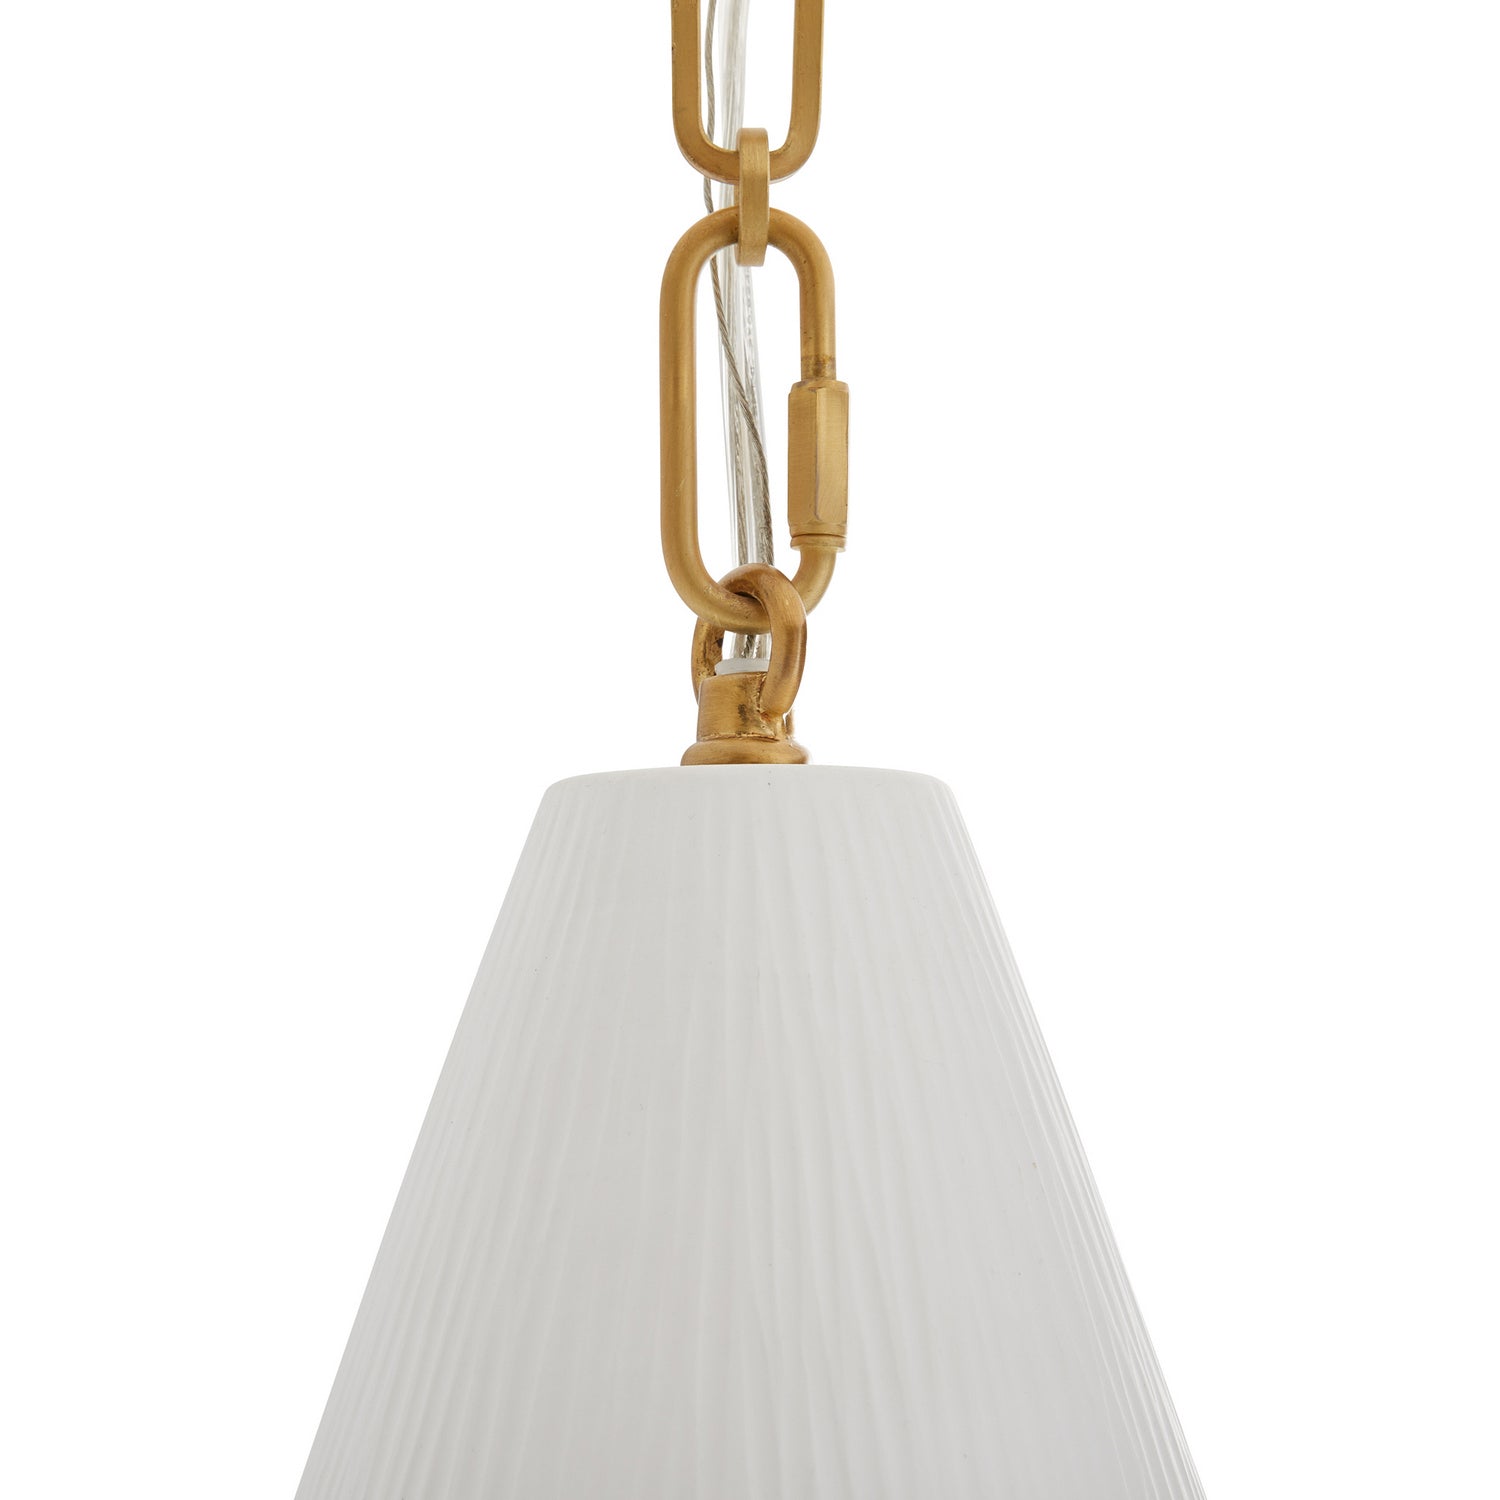 One Light Pendant from the Oakland collection in Matte Bone finish